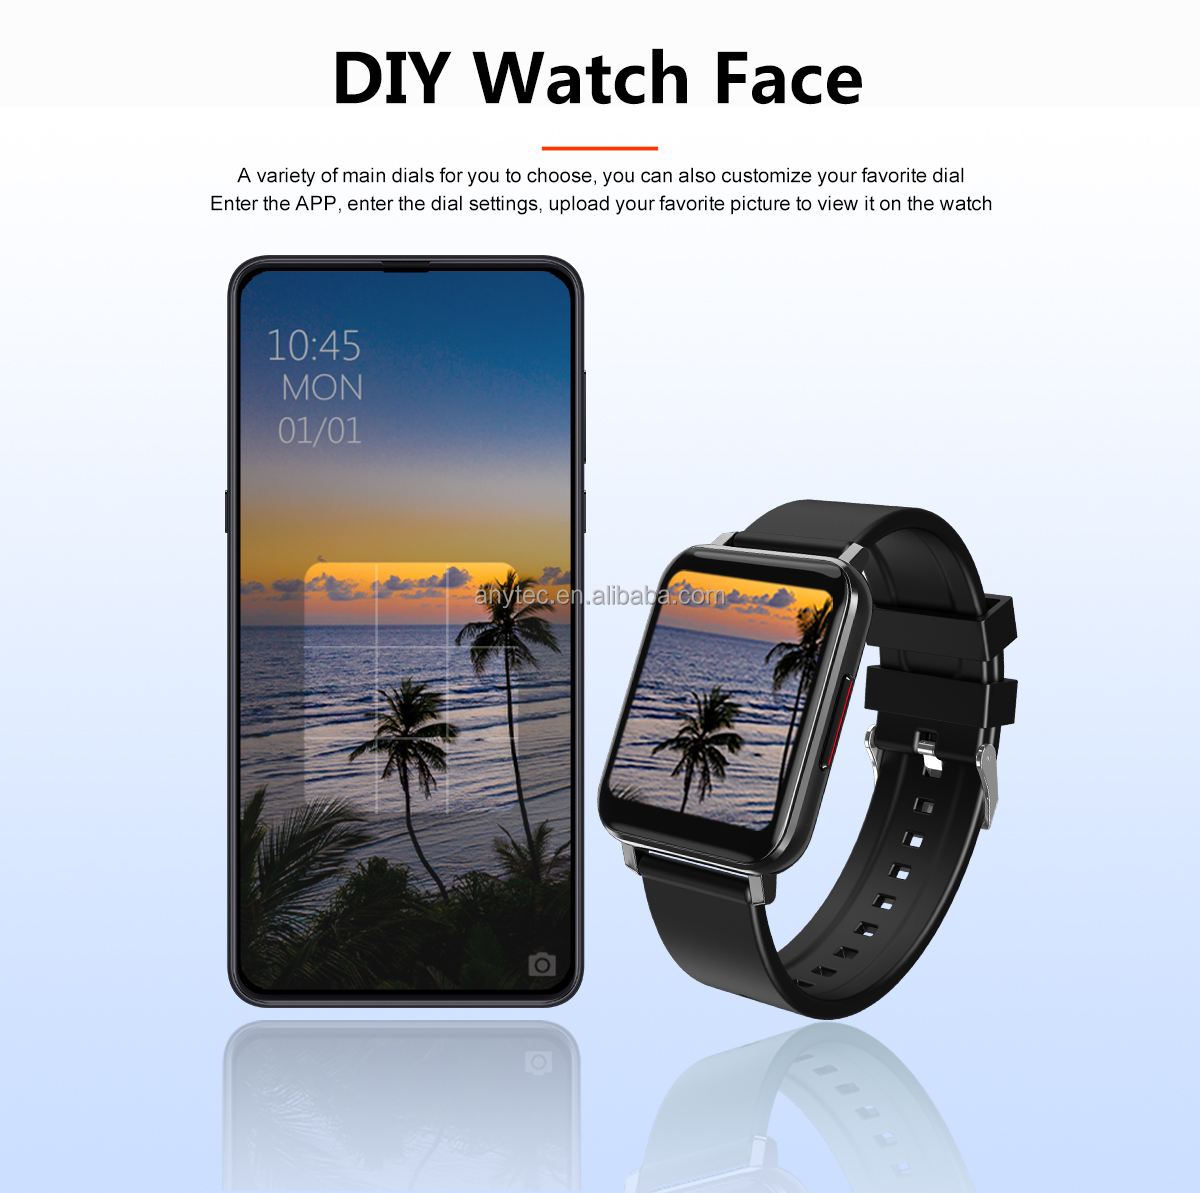 Shenzhen Anytec smartwatch hear rate fitness watch discount in mobile phone OEM top quality 2021 sports smart watches bands